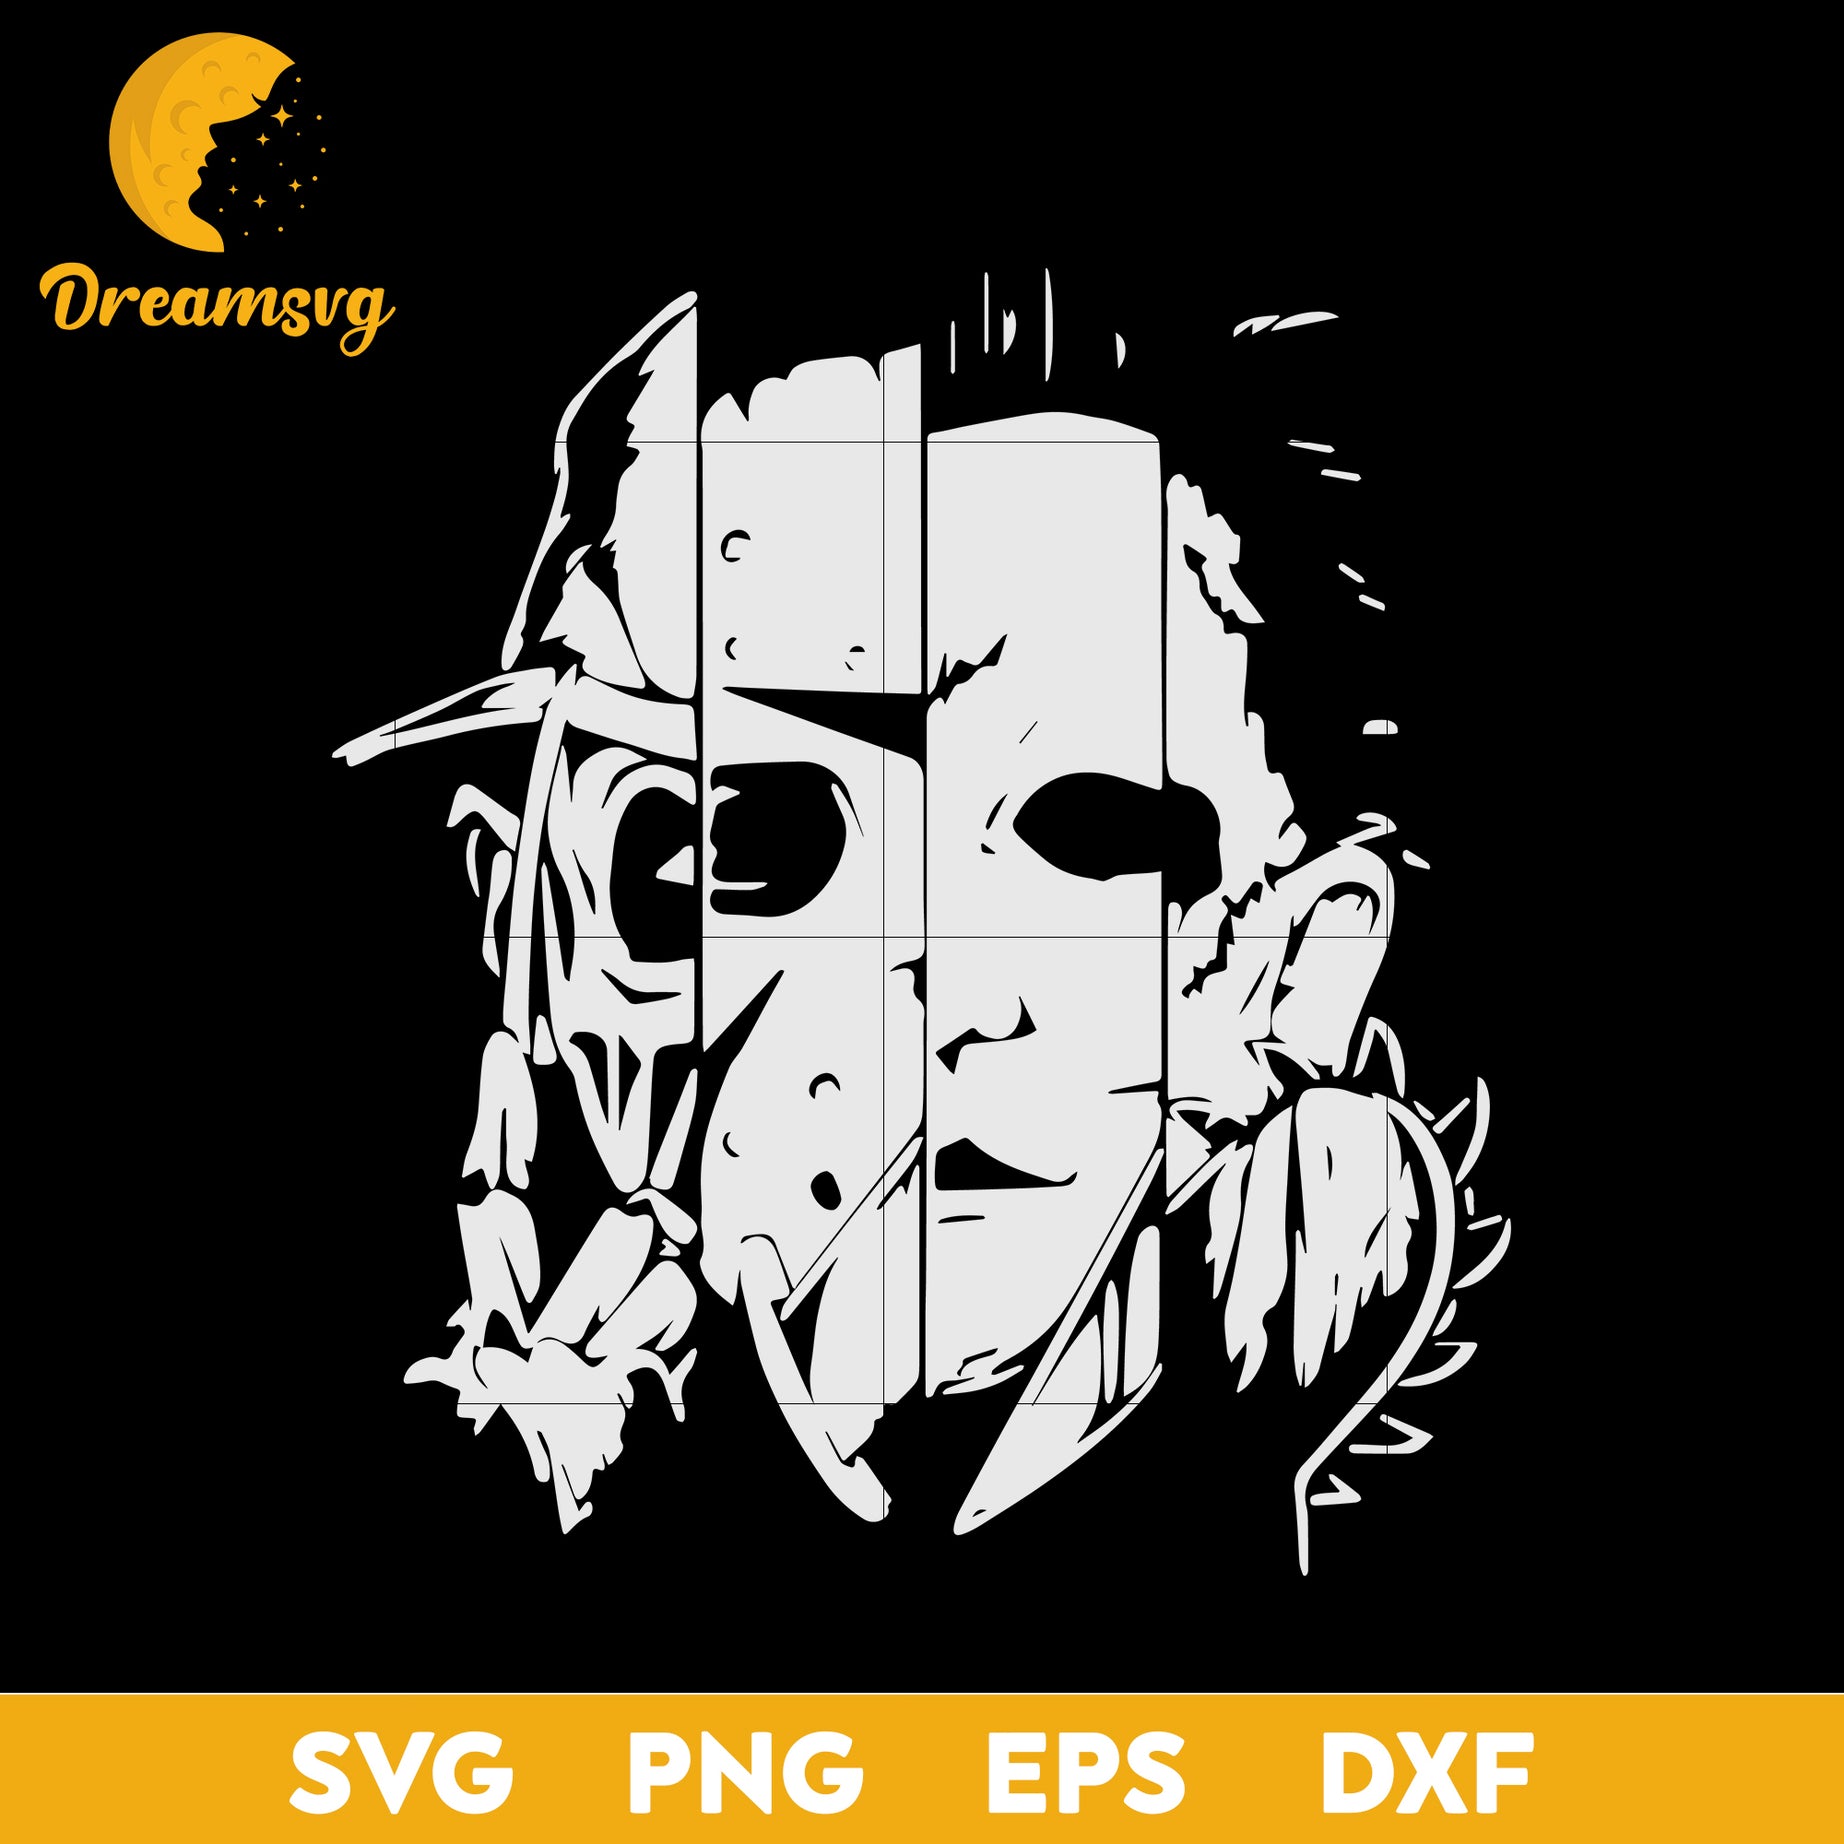 Freddy Jason Michael Myers and Leather face svg, Halloween svg, png, dxf, eps digital file.